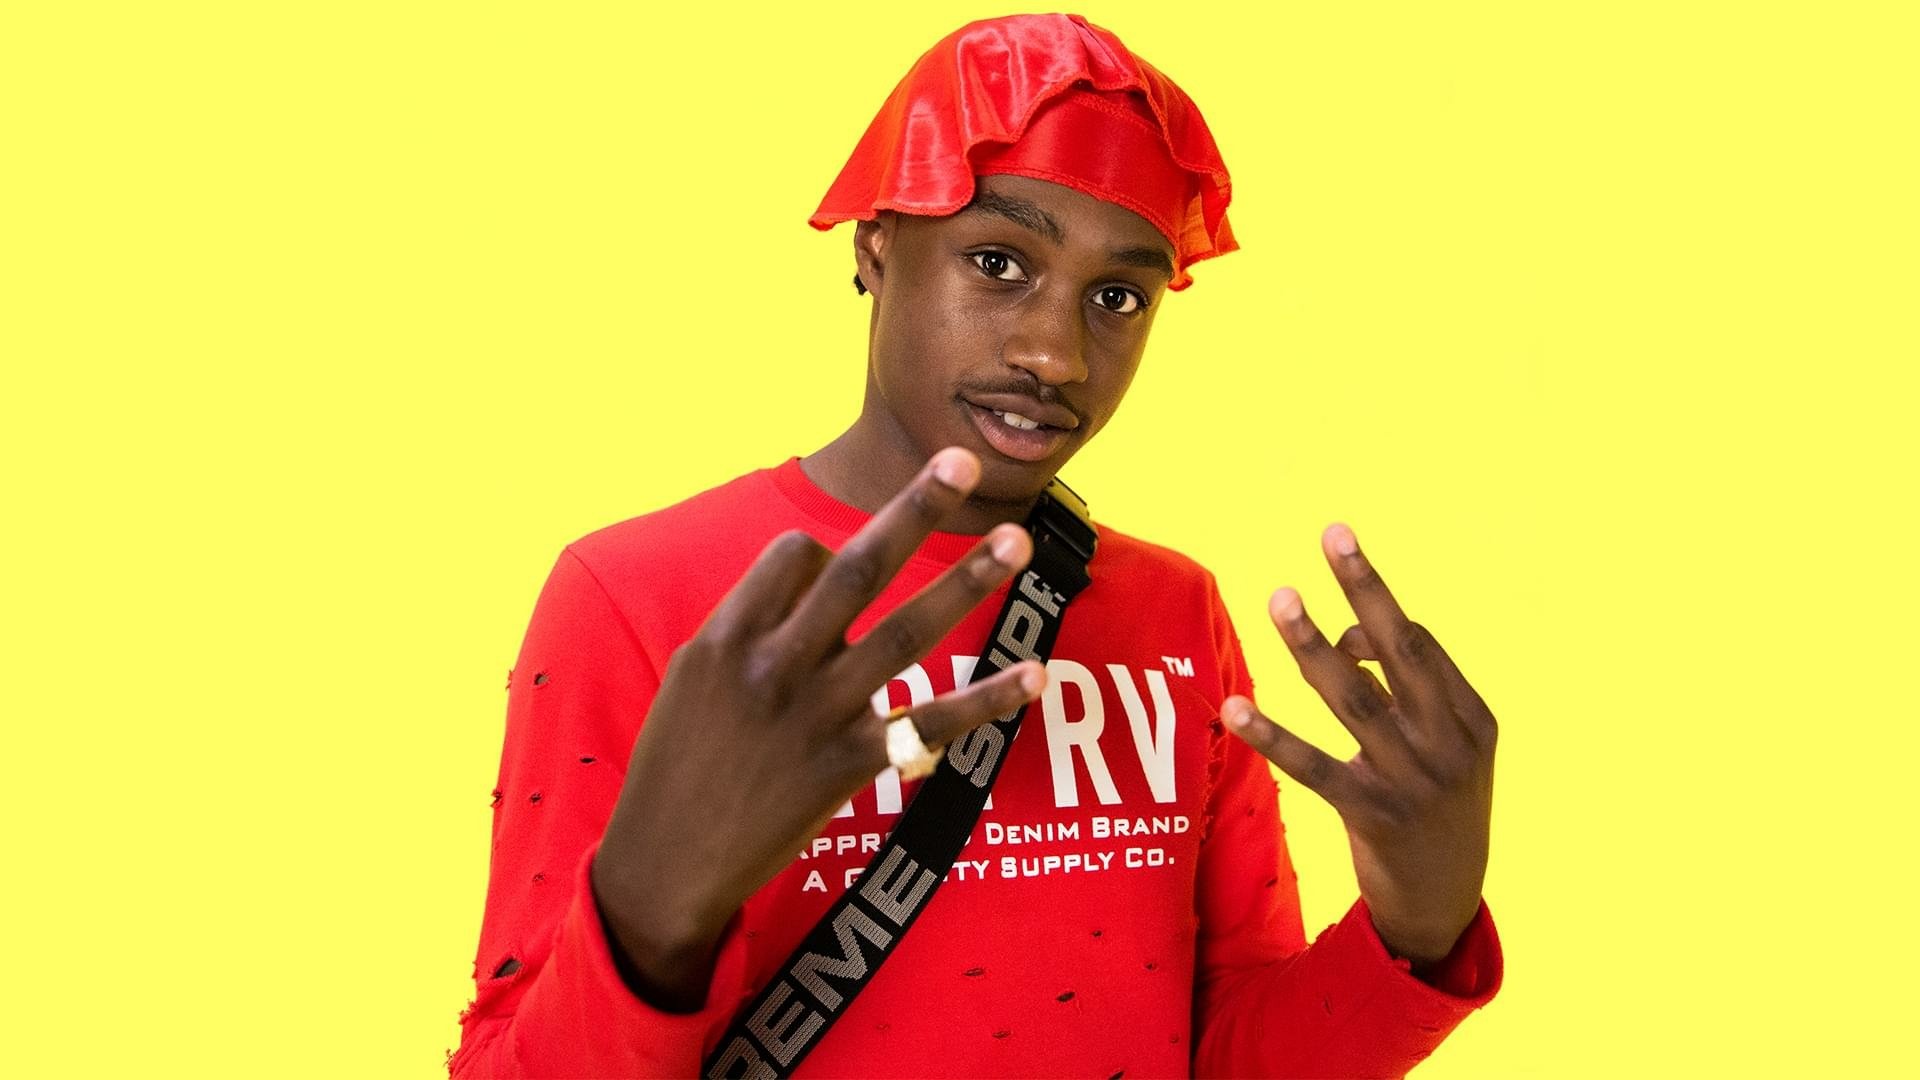 HD desktop wallpaper featuring a person in a red outfit and bucket hat against a yellow background, gesturing with their hands.